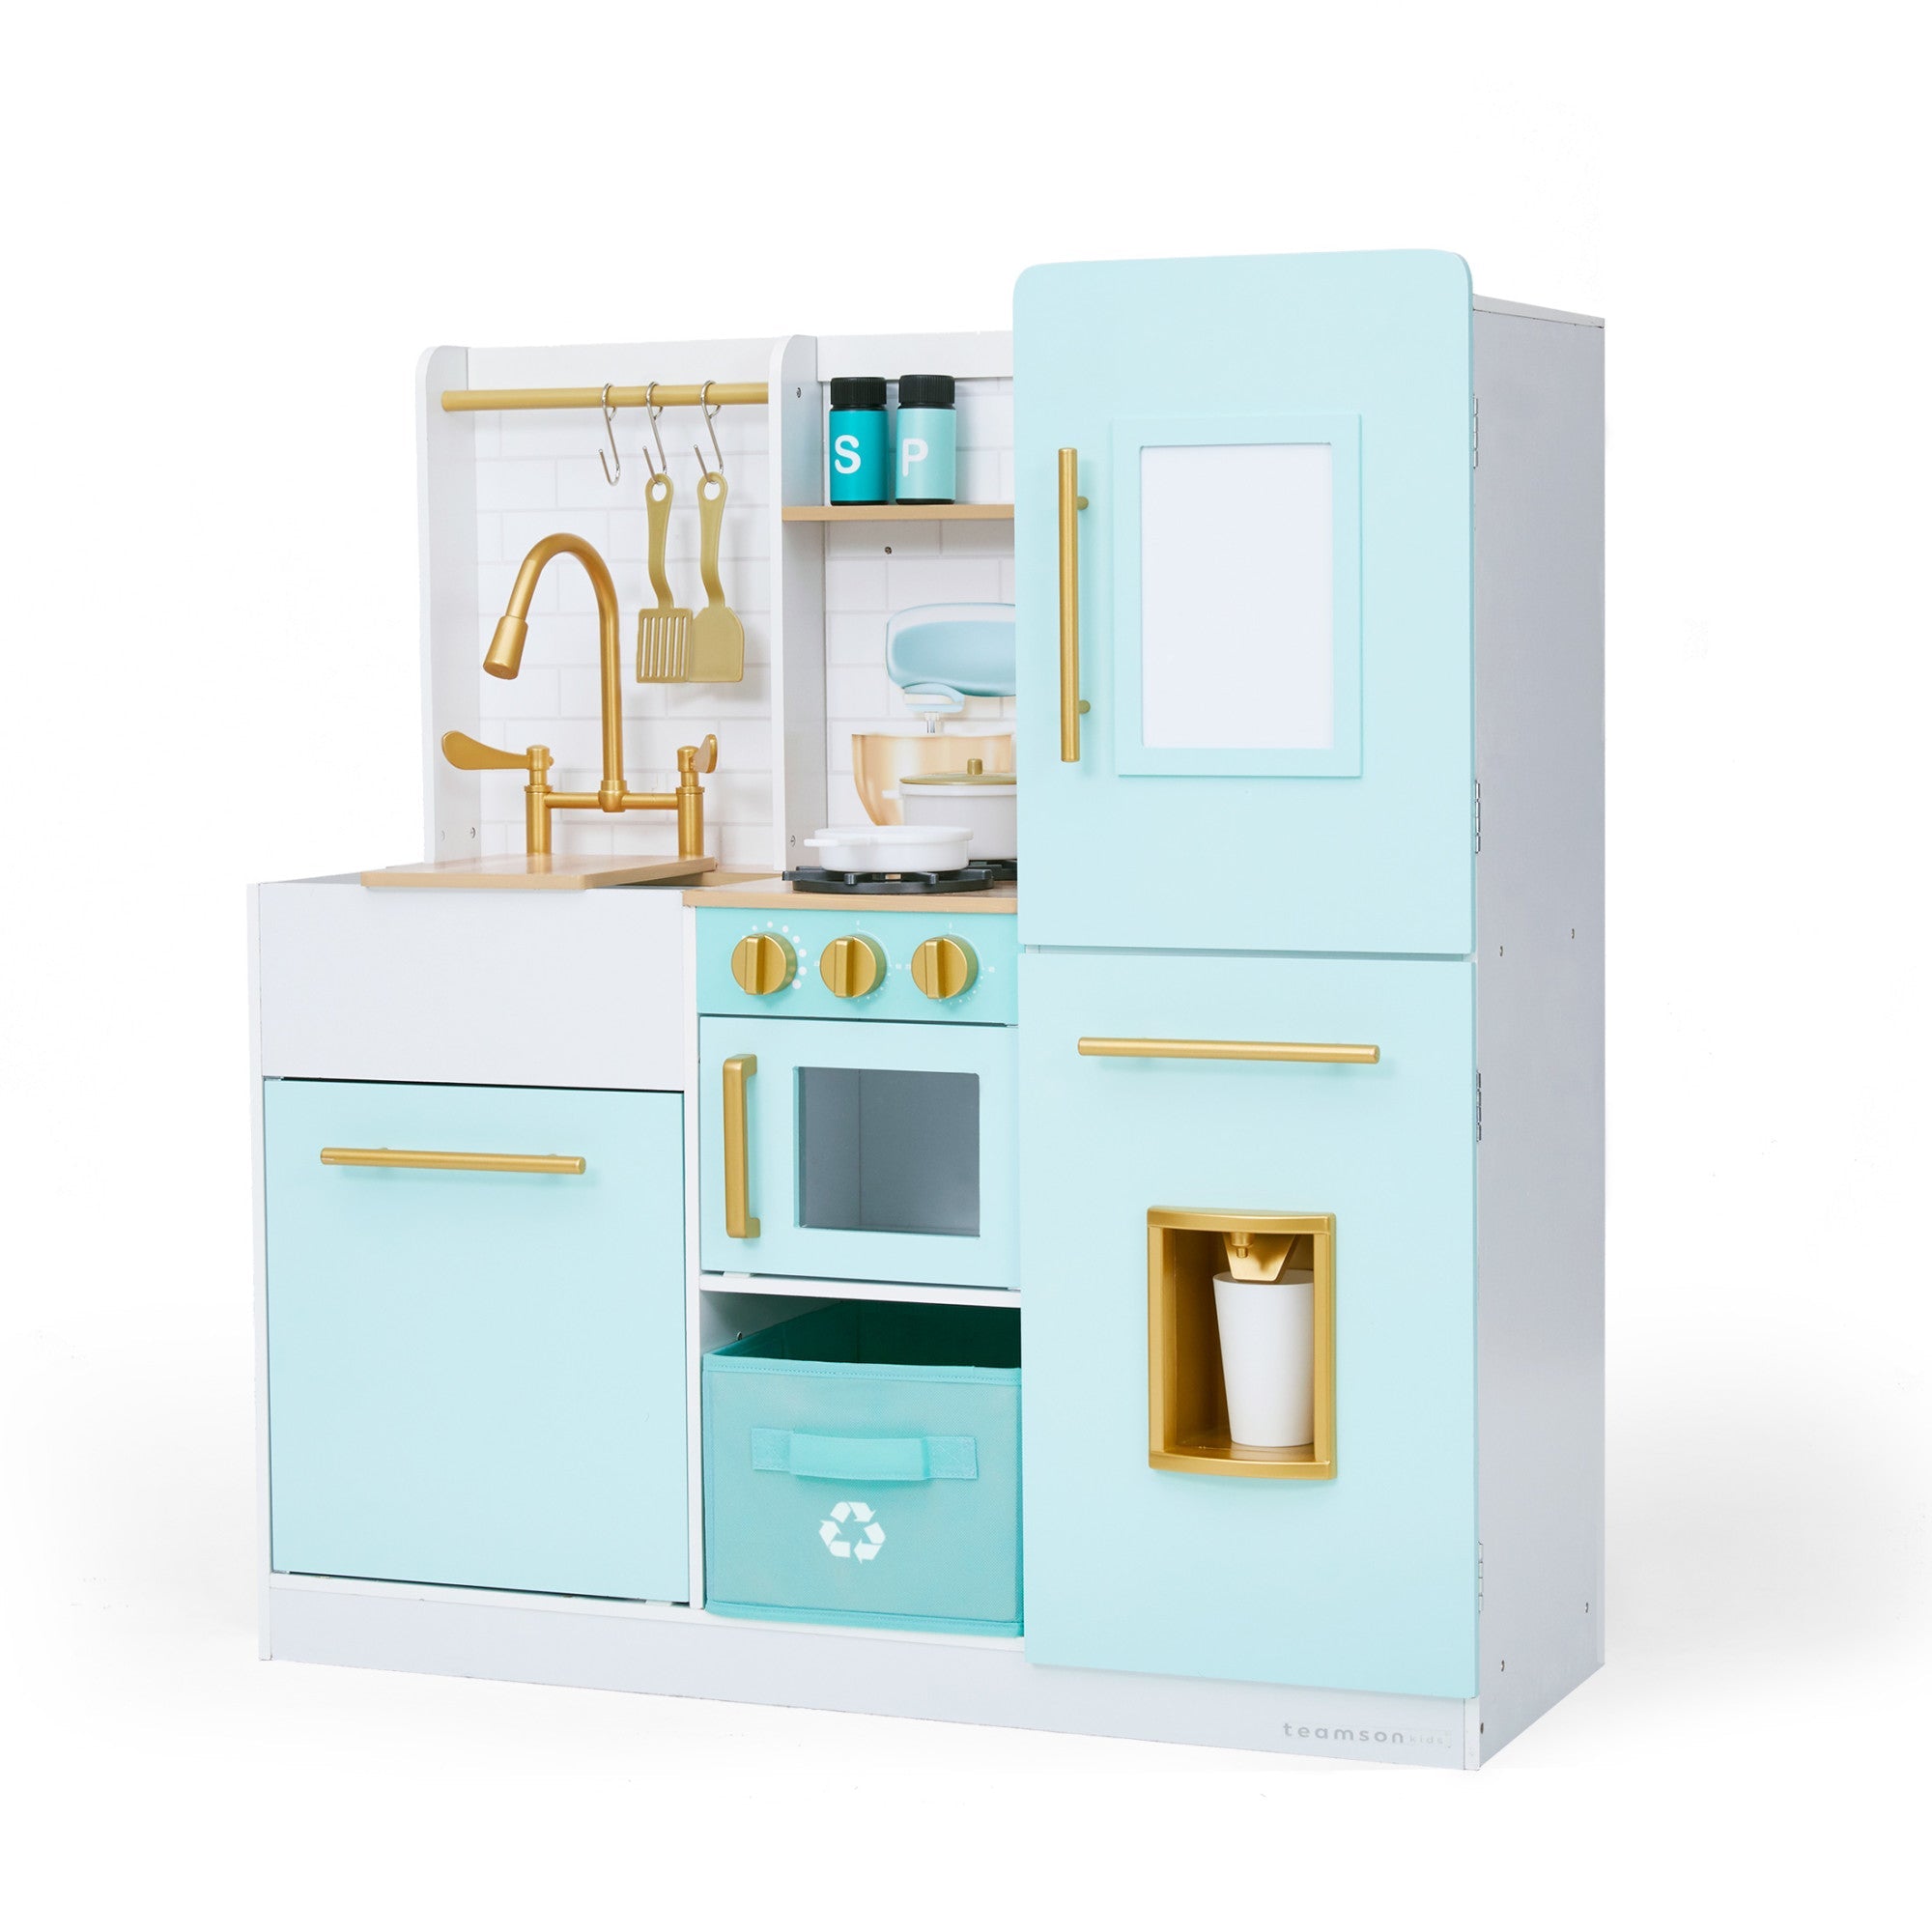 Biscay Delight Classic Play Kitchen with Magnetic Refrigerator and Accessories, Mint